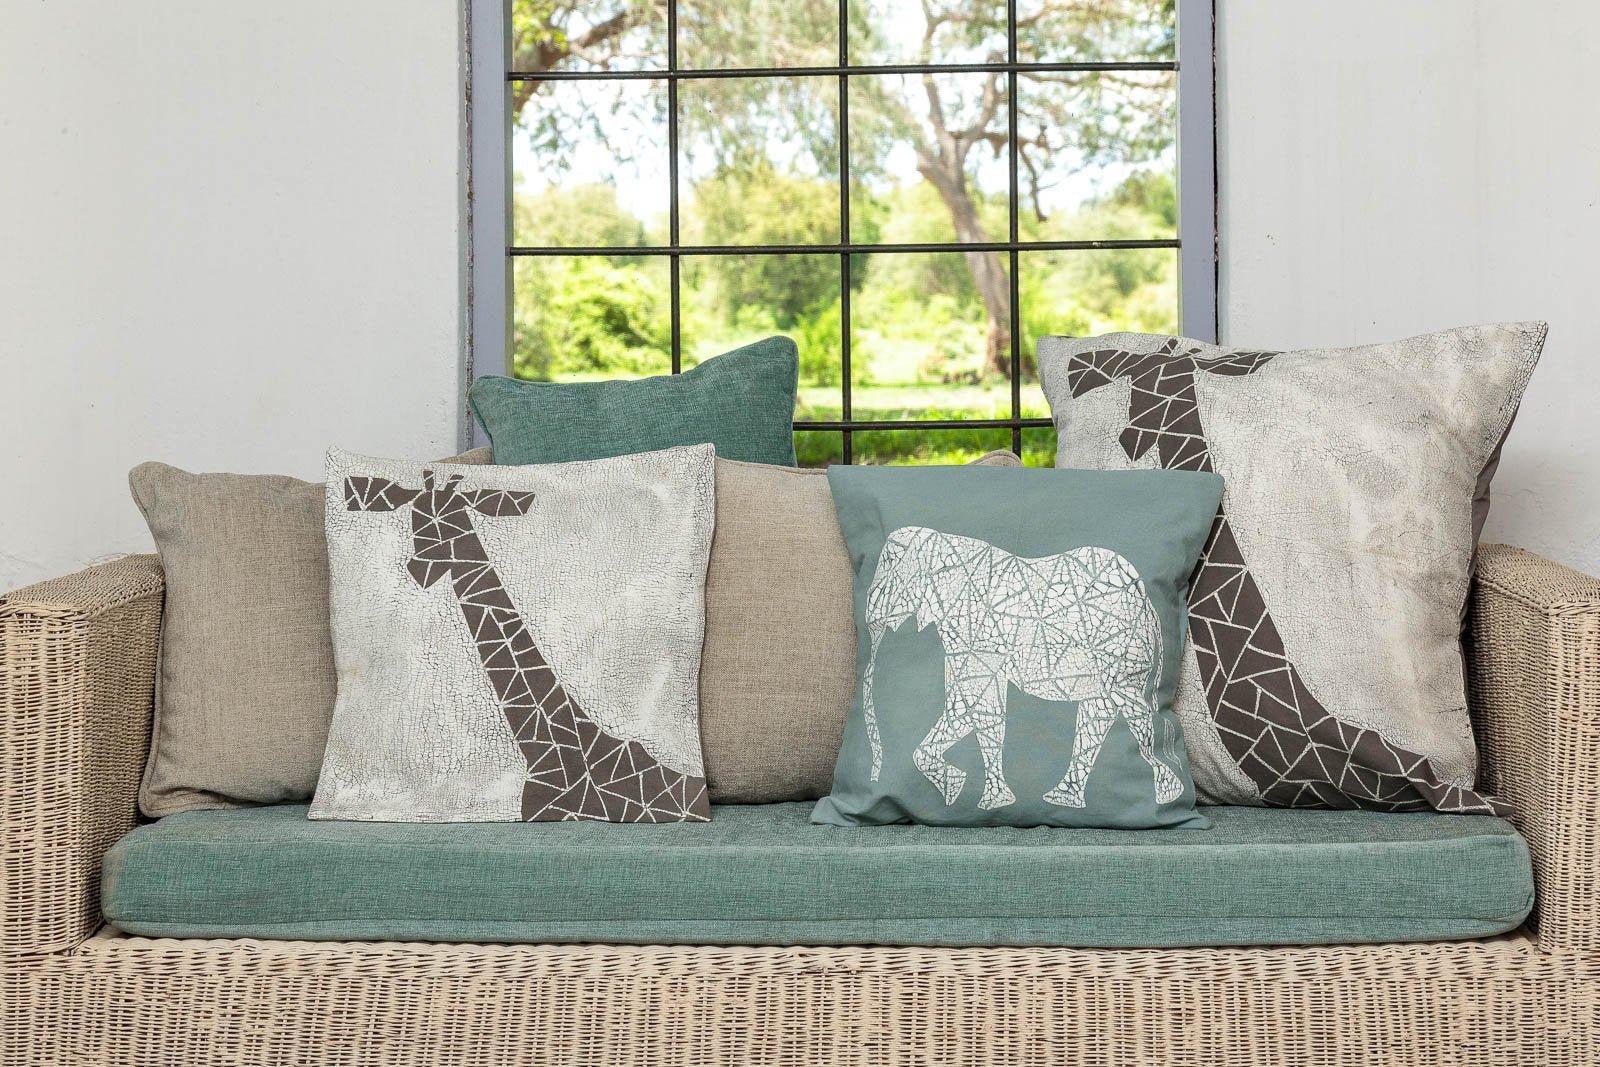 Crackle Animals Elephant Light Blue Cushion Cover - Handmade by TRIBAL TEXTILES - Handcrafted Home Decor Interiors - African Made